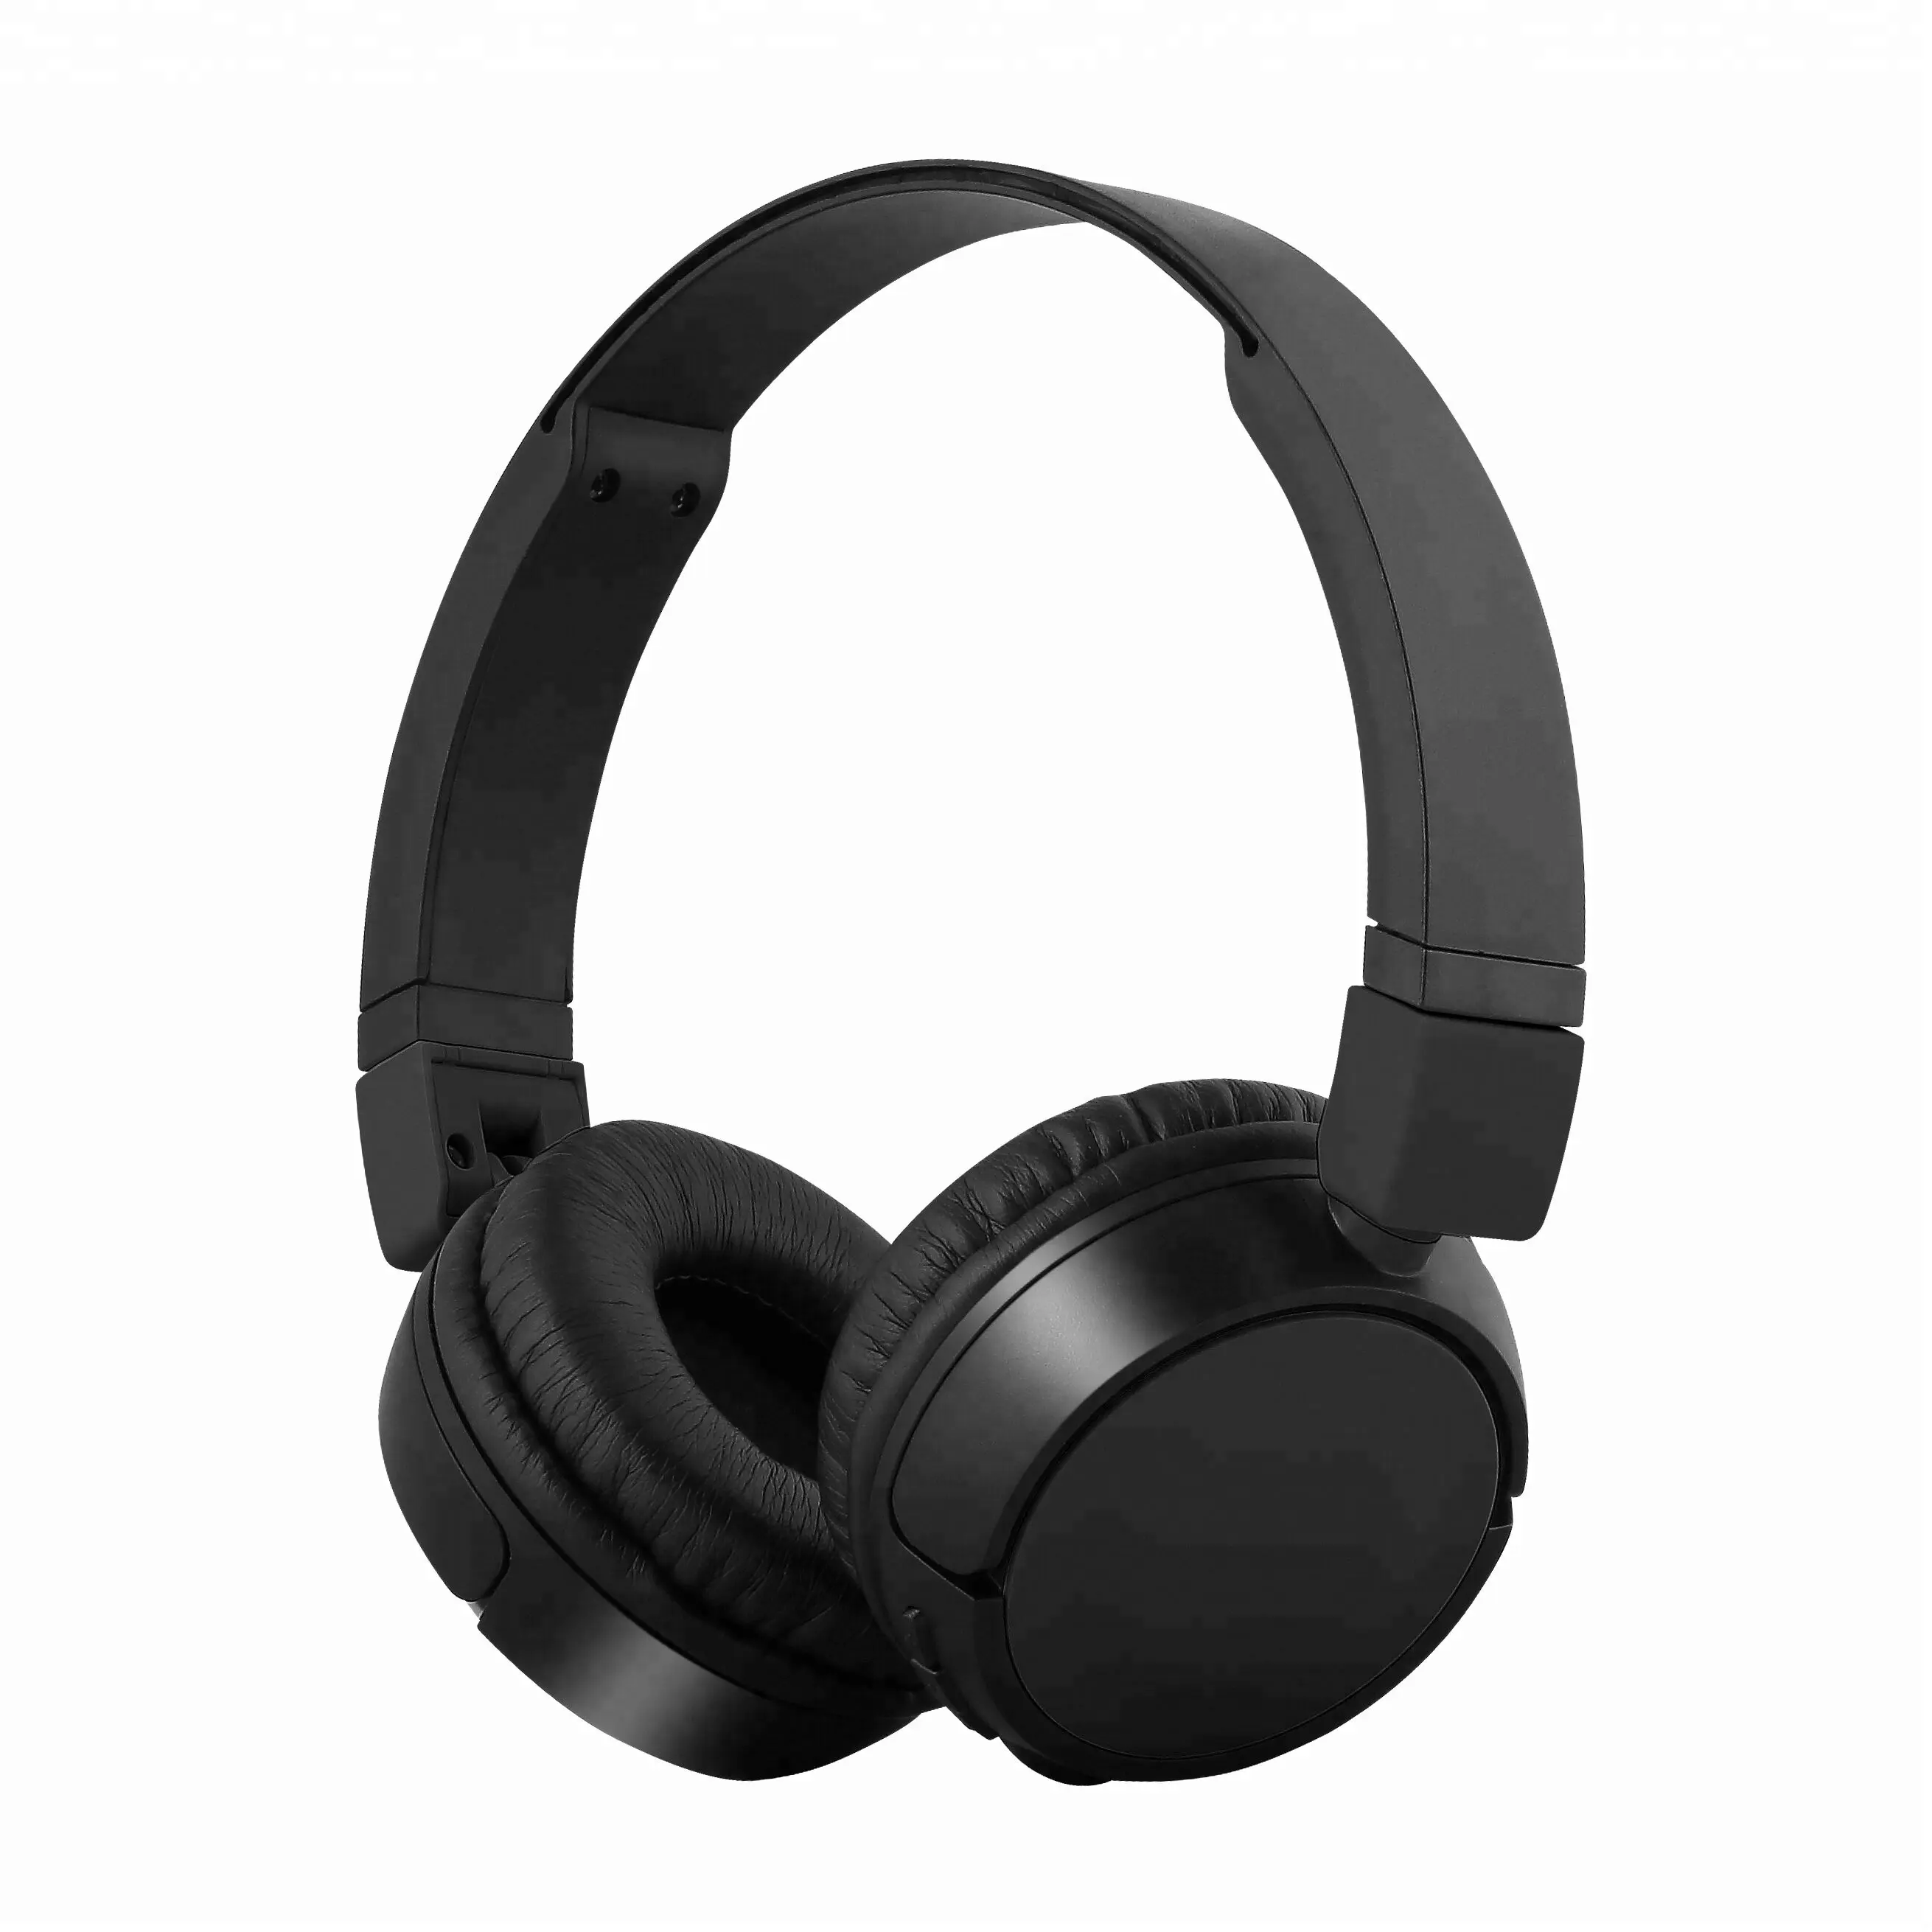 Wireless Headphones for computer on ear Headphones With Microphone guangdong zhong wang factory wholesale